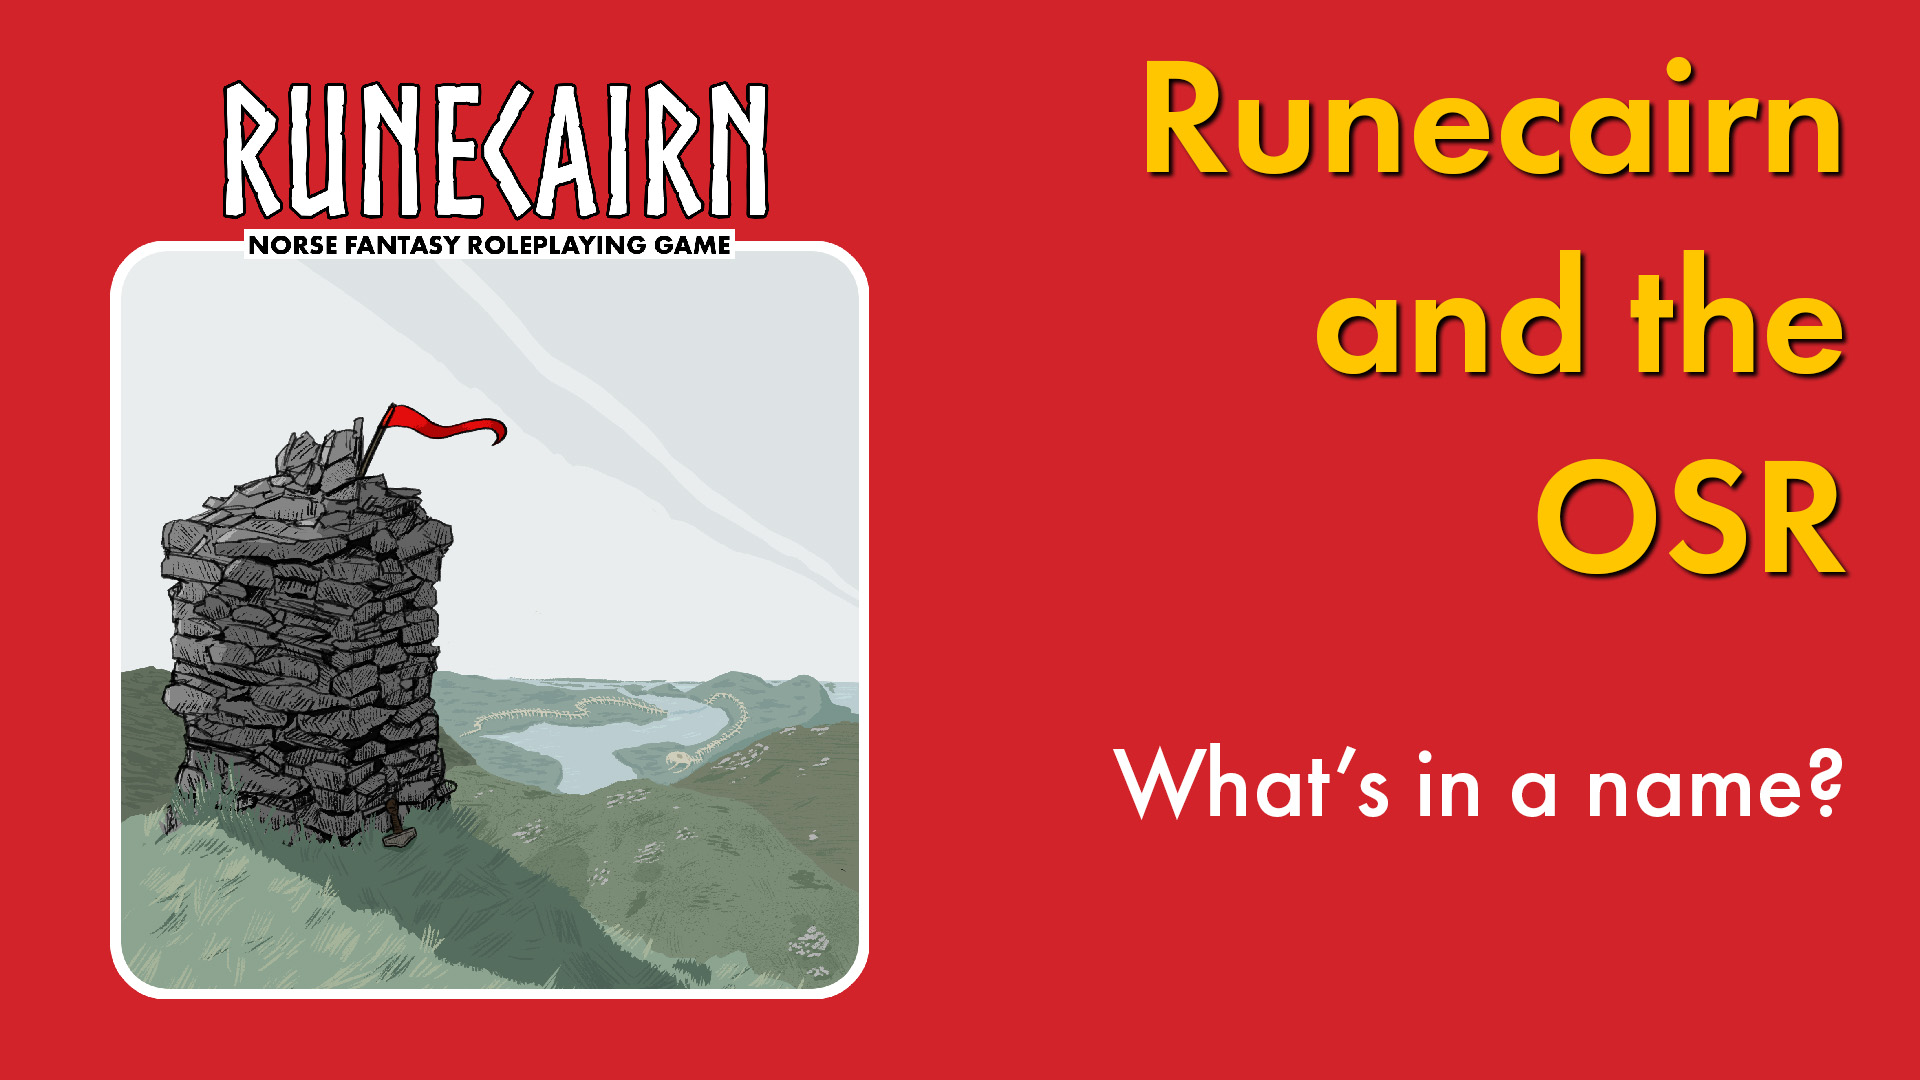 Runecairn and the OSR